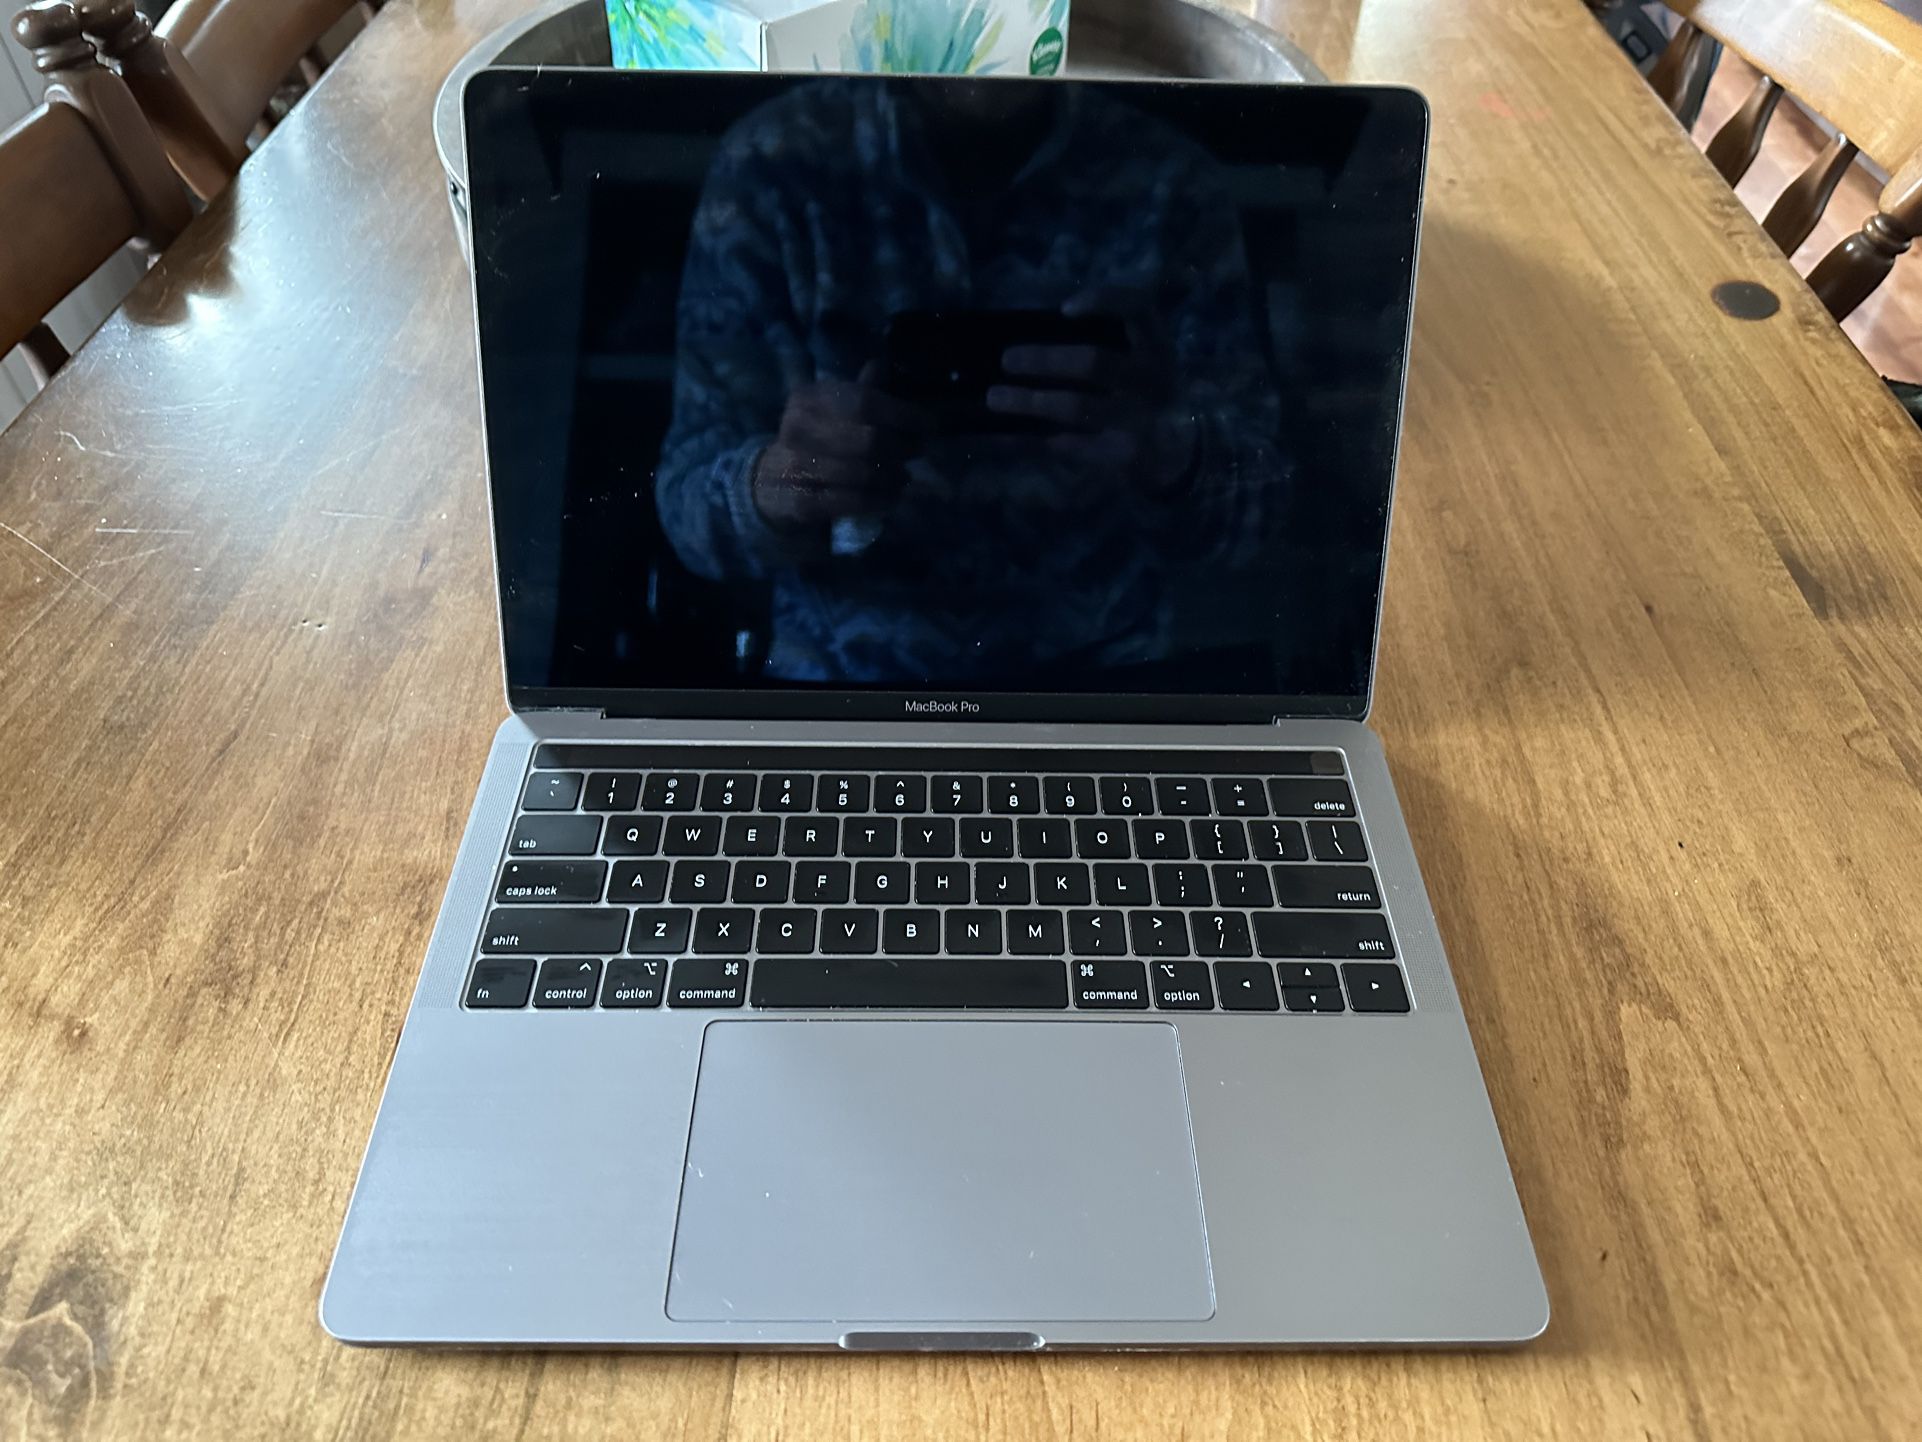 2018 13.3 Space Grey Macbook Pro with Retina Display and Touch Bar